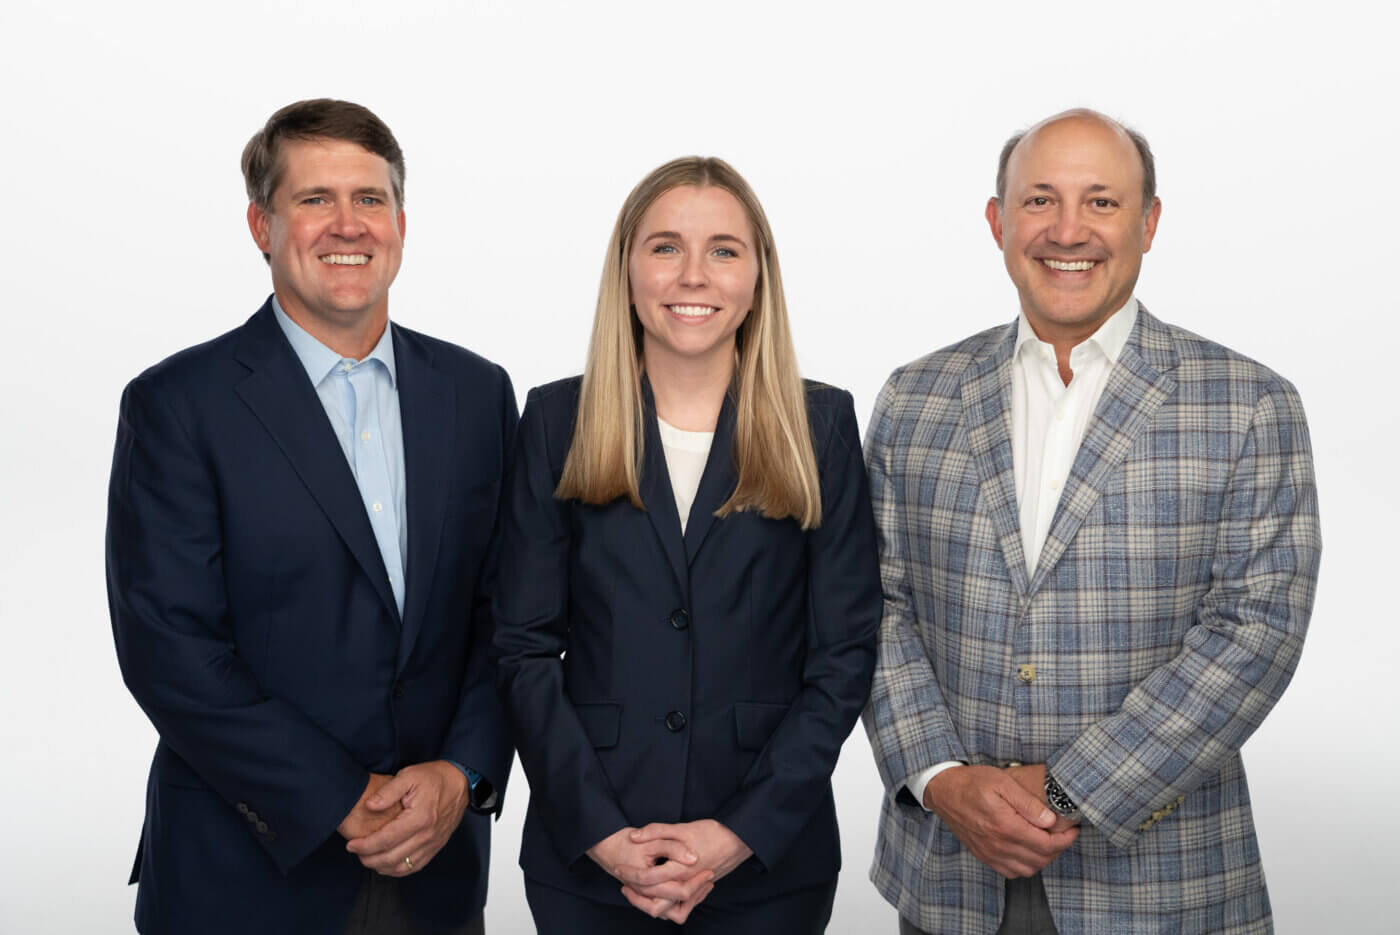 Clover Capital Partners are Hays Evans, Kendall Southerland and Tripps Moog.